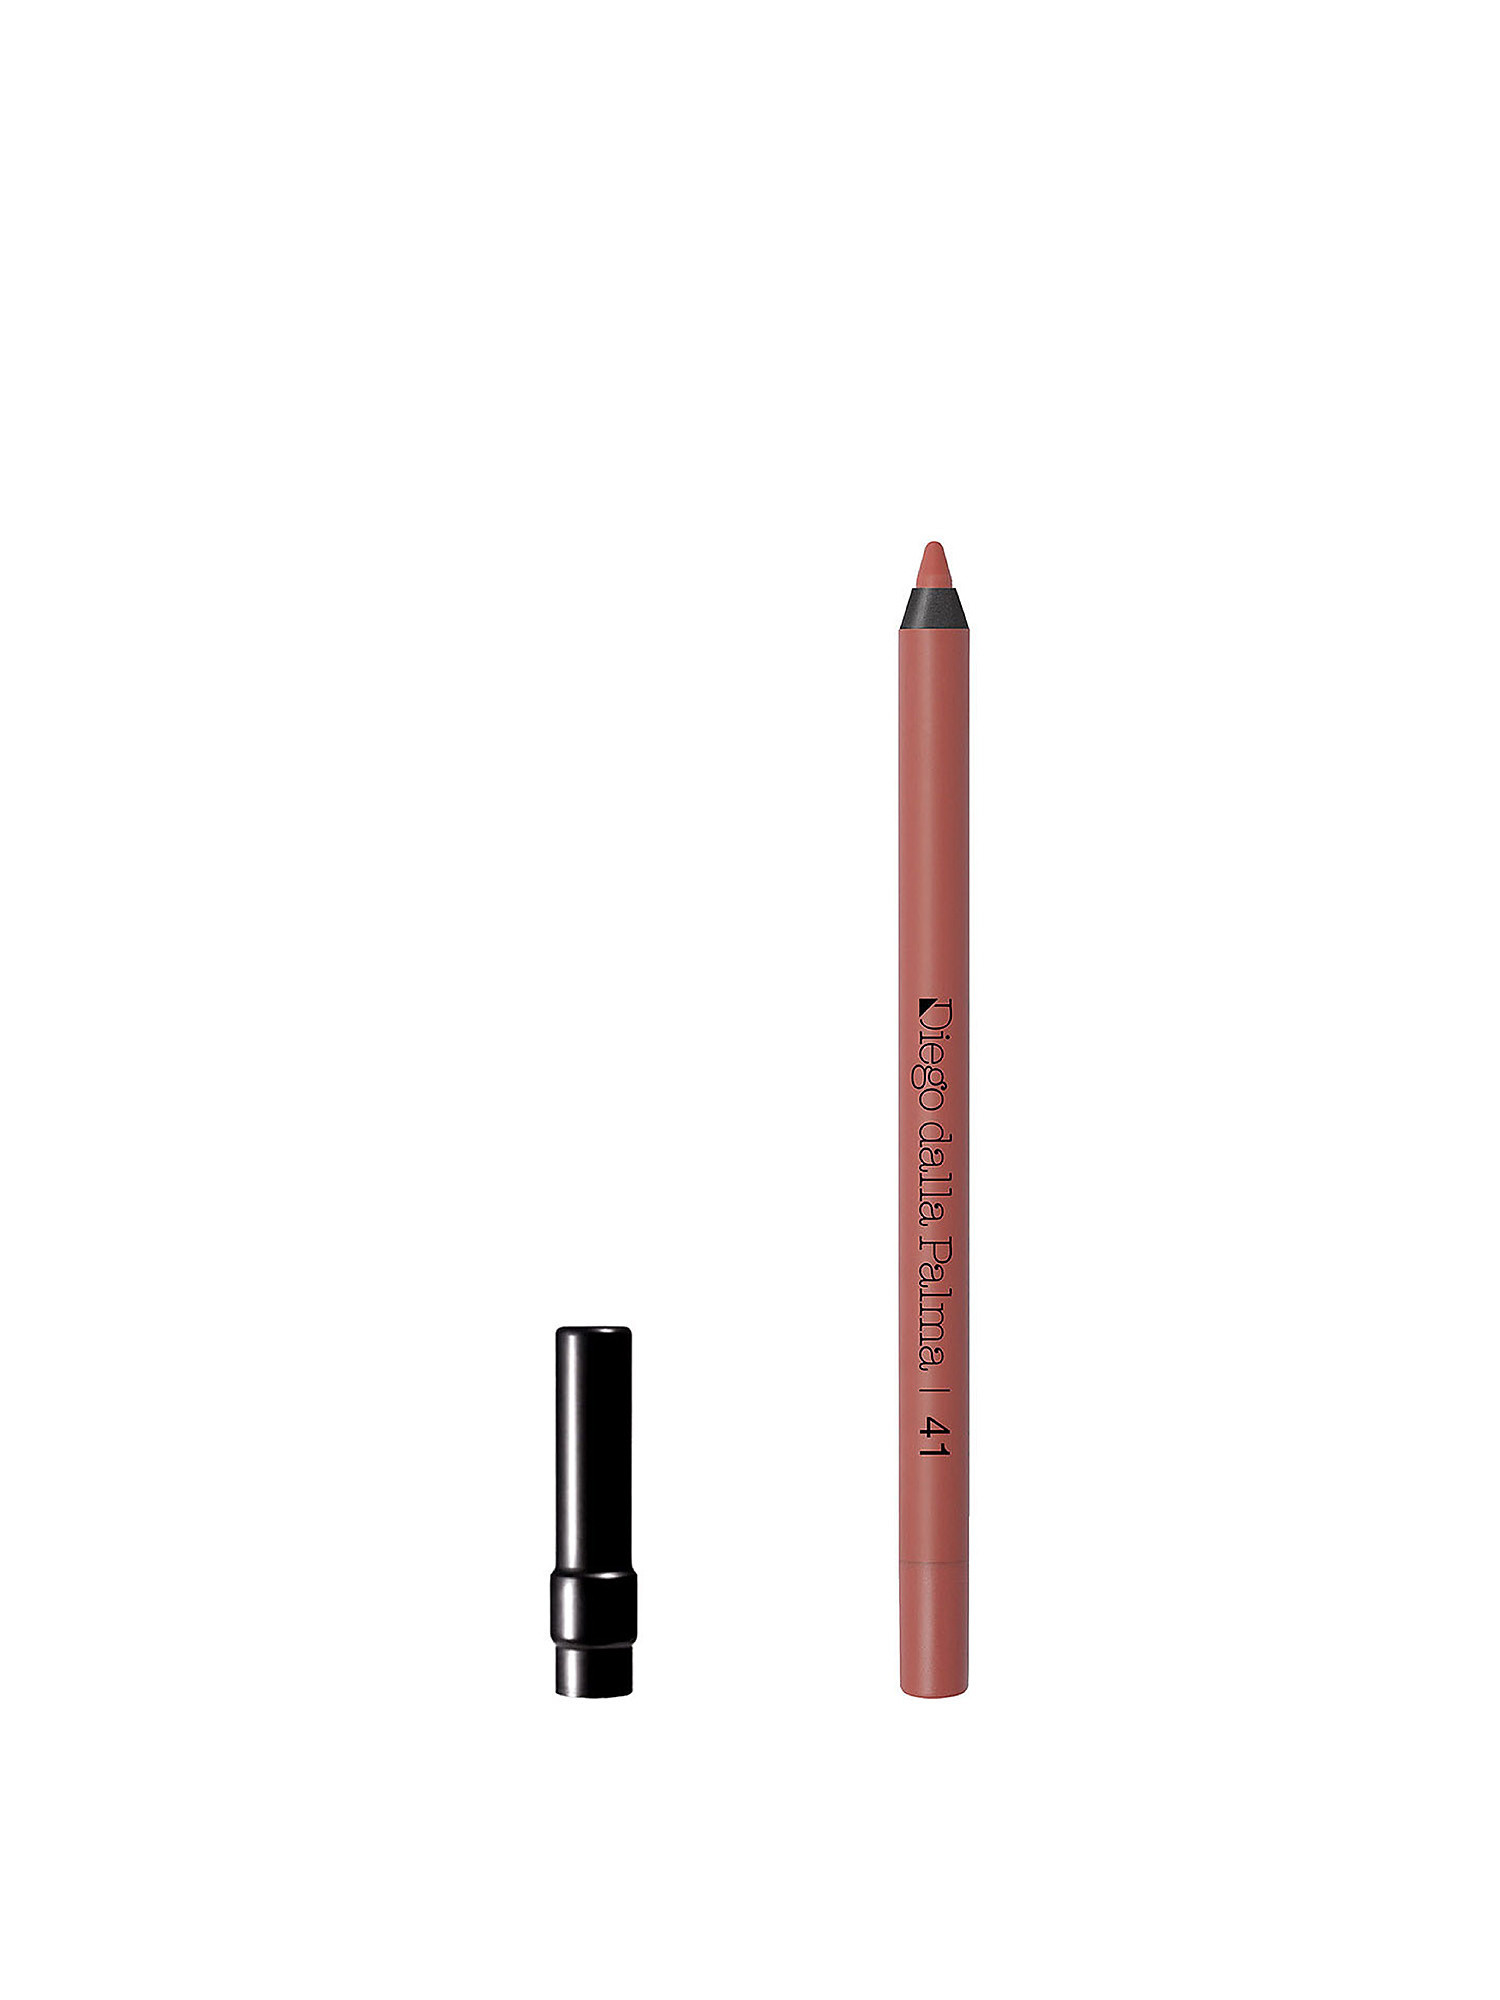 STAY ON ME Lip Liner Long Lasting Water resistant - 41, Nude, large image number 0